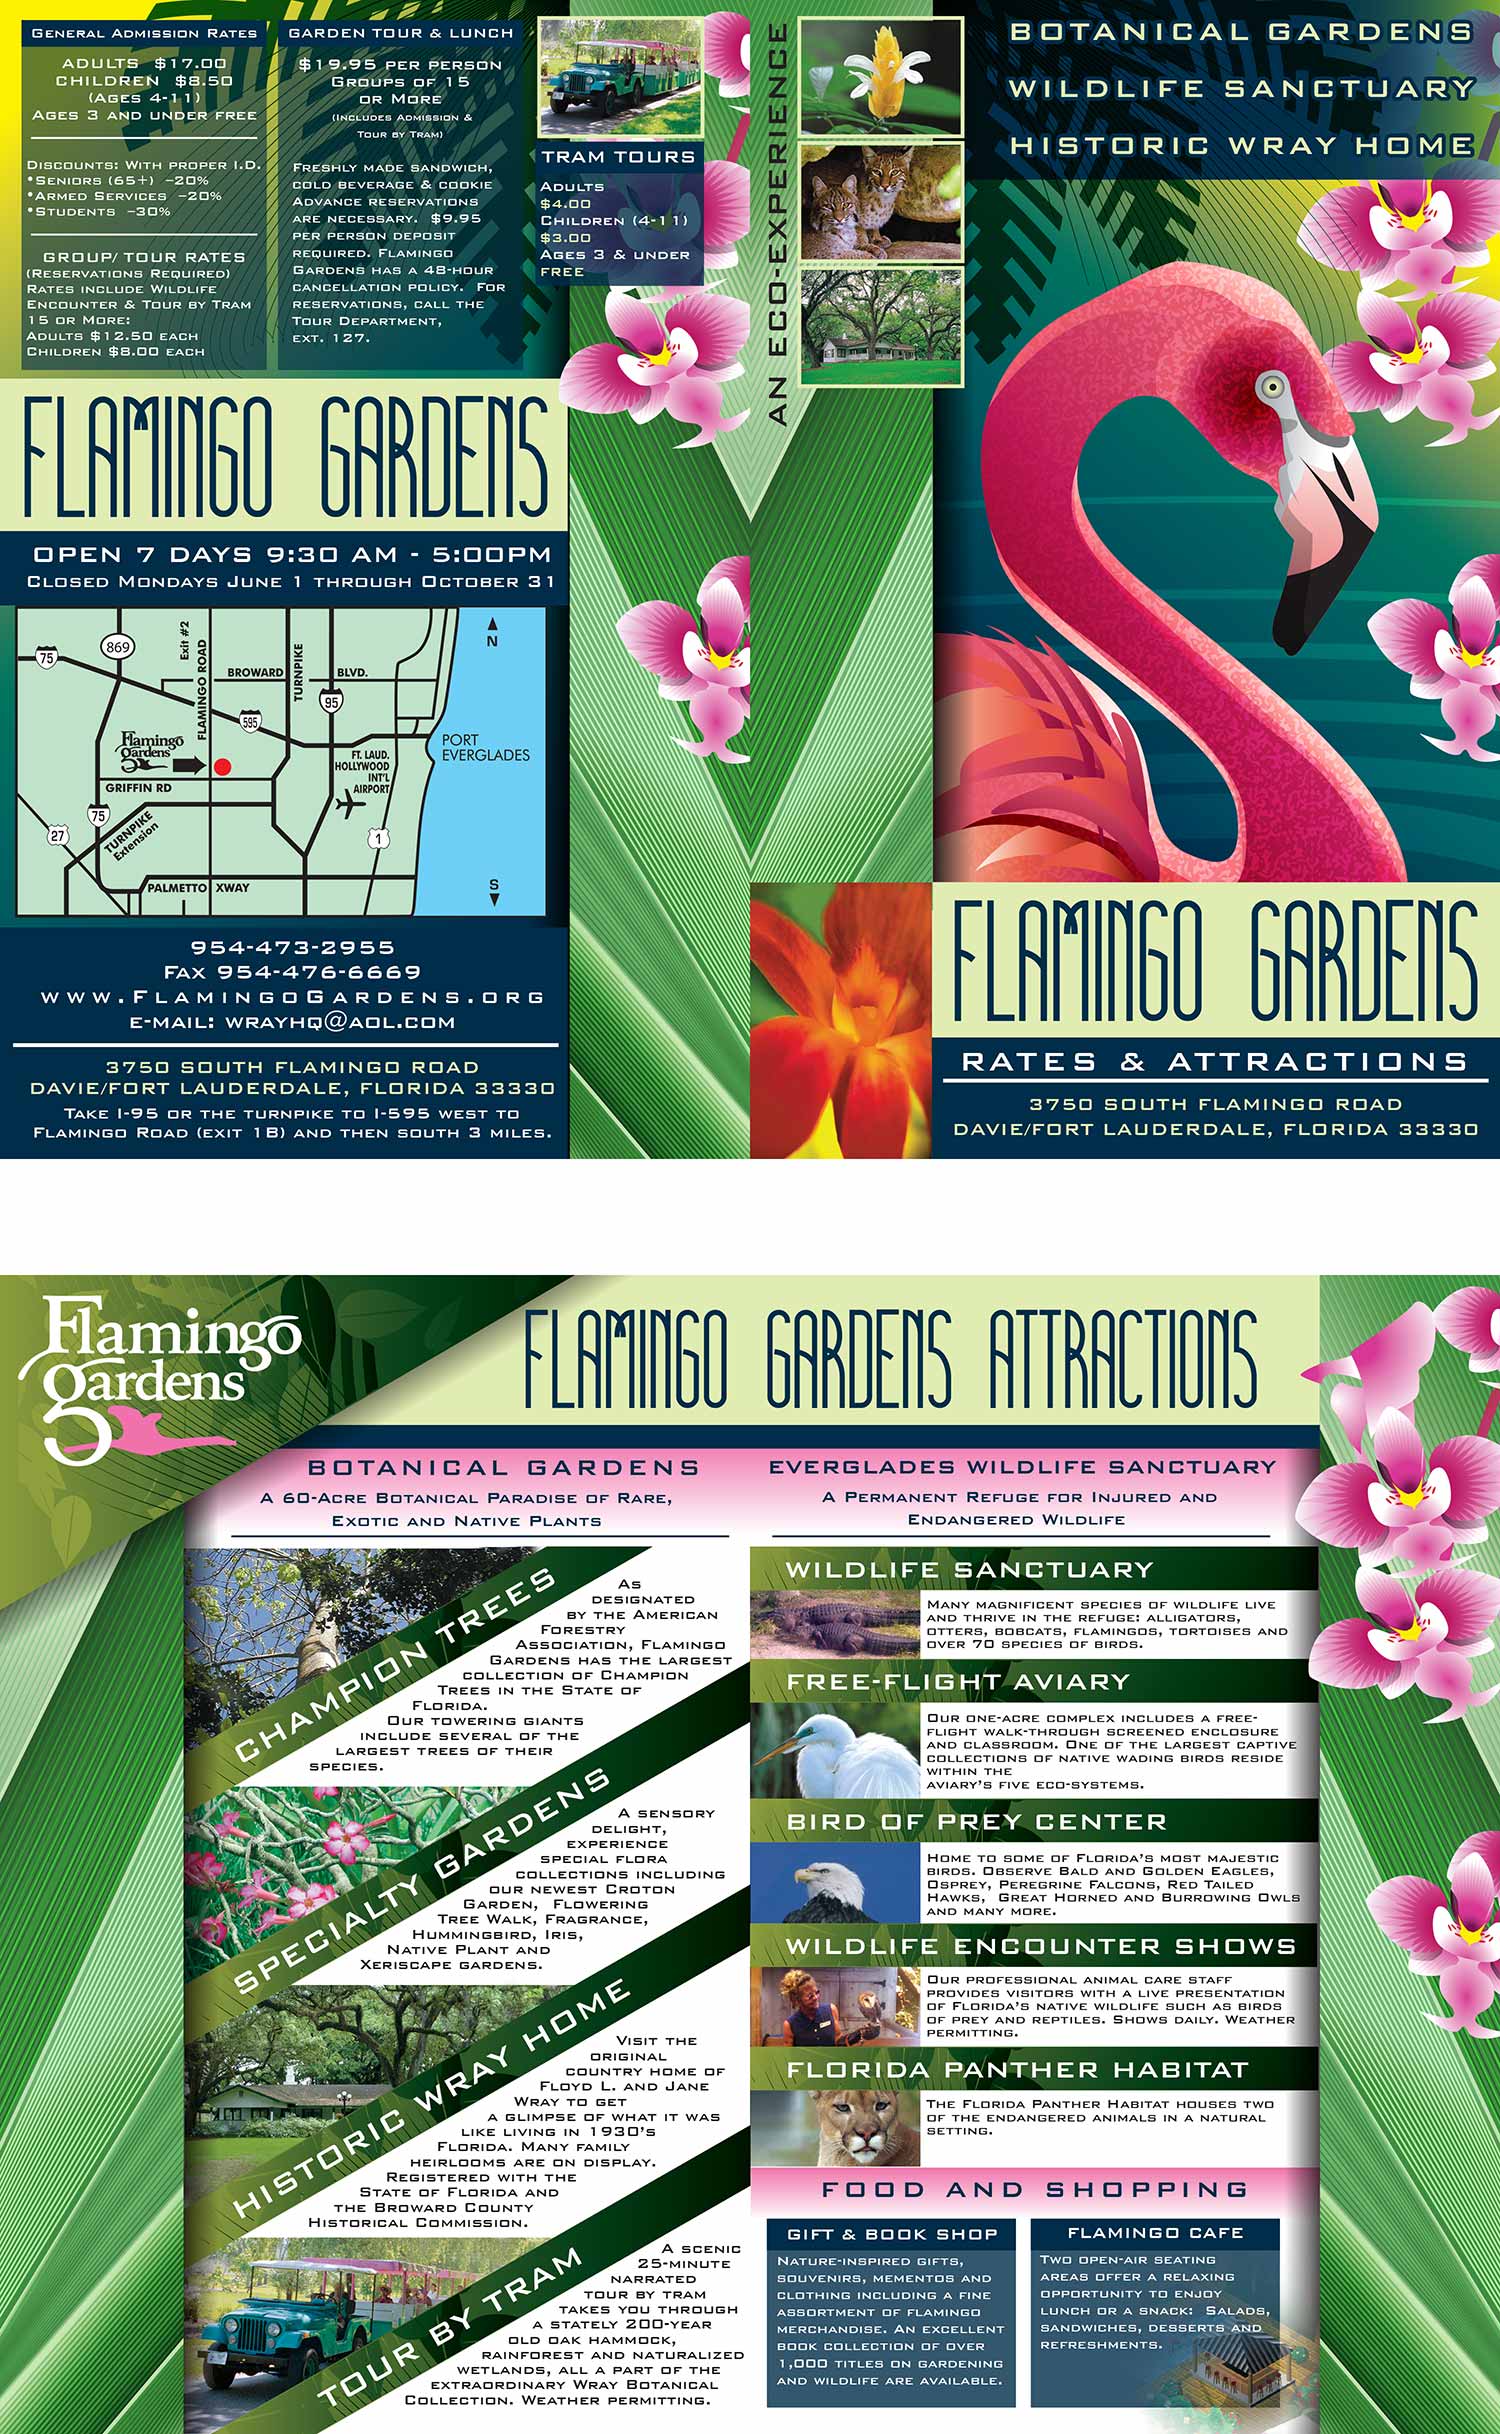 Flamingo Gardens Rates and Attractions Flyer Design